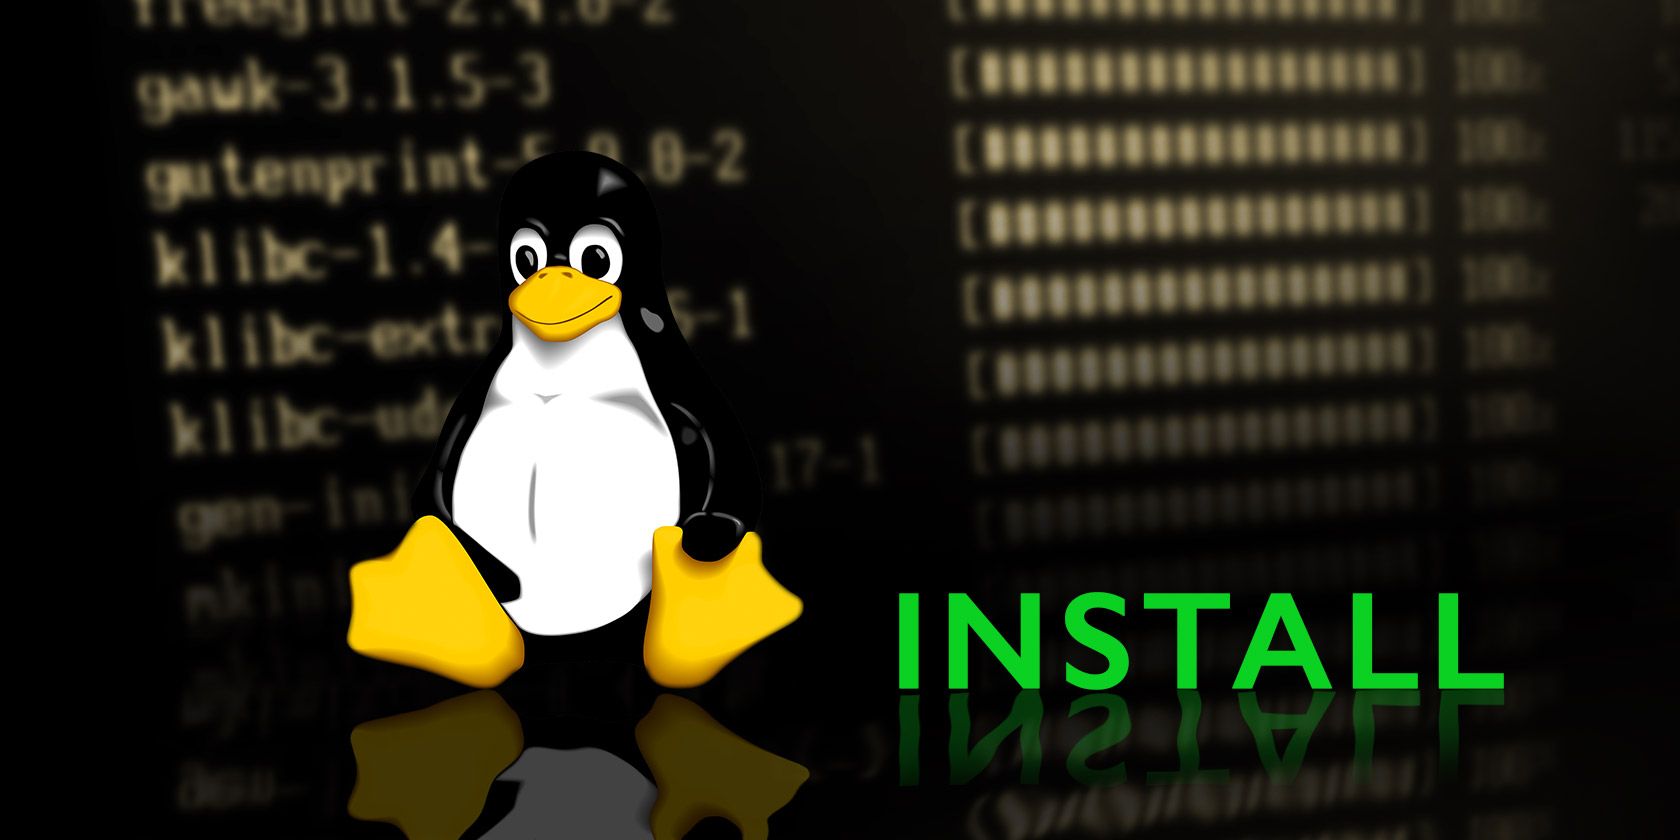 install-linux-apps